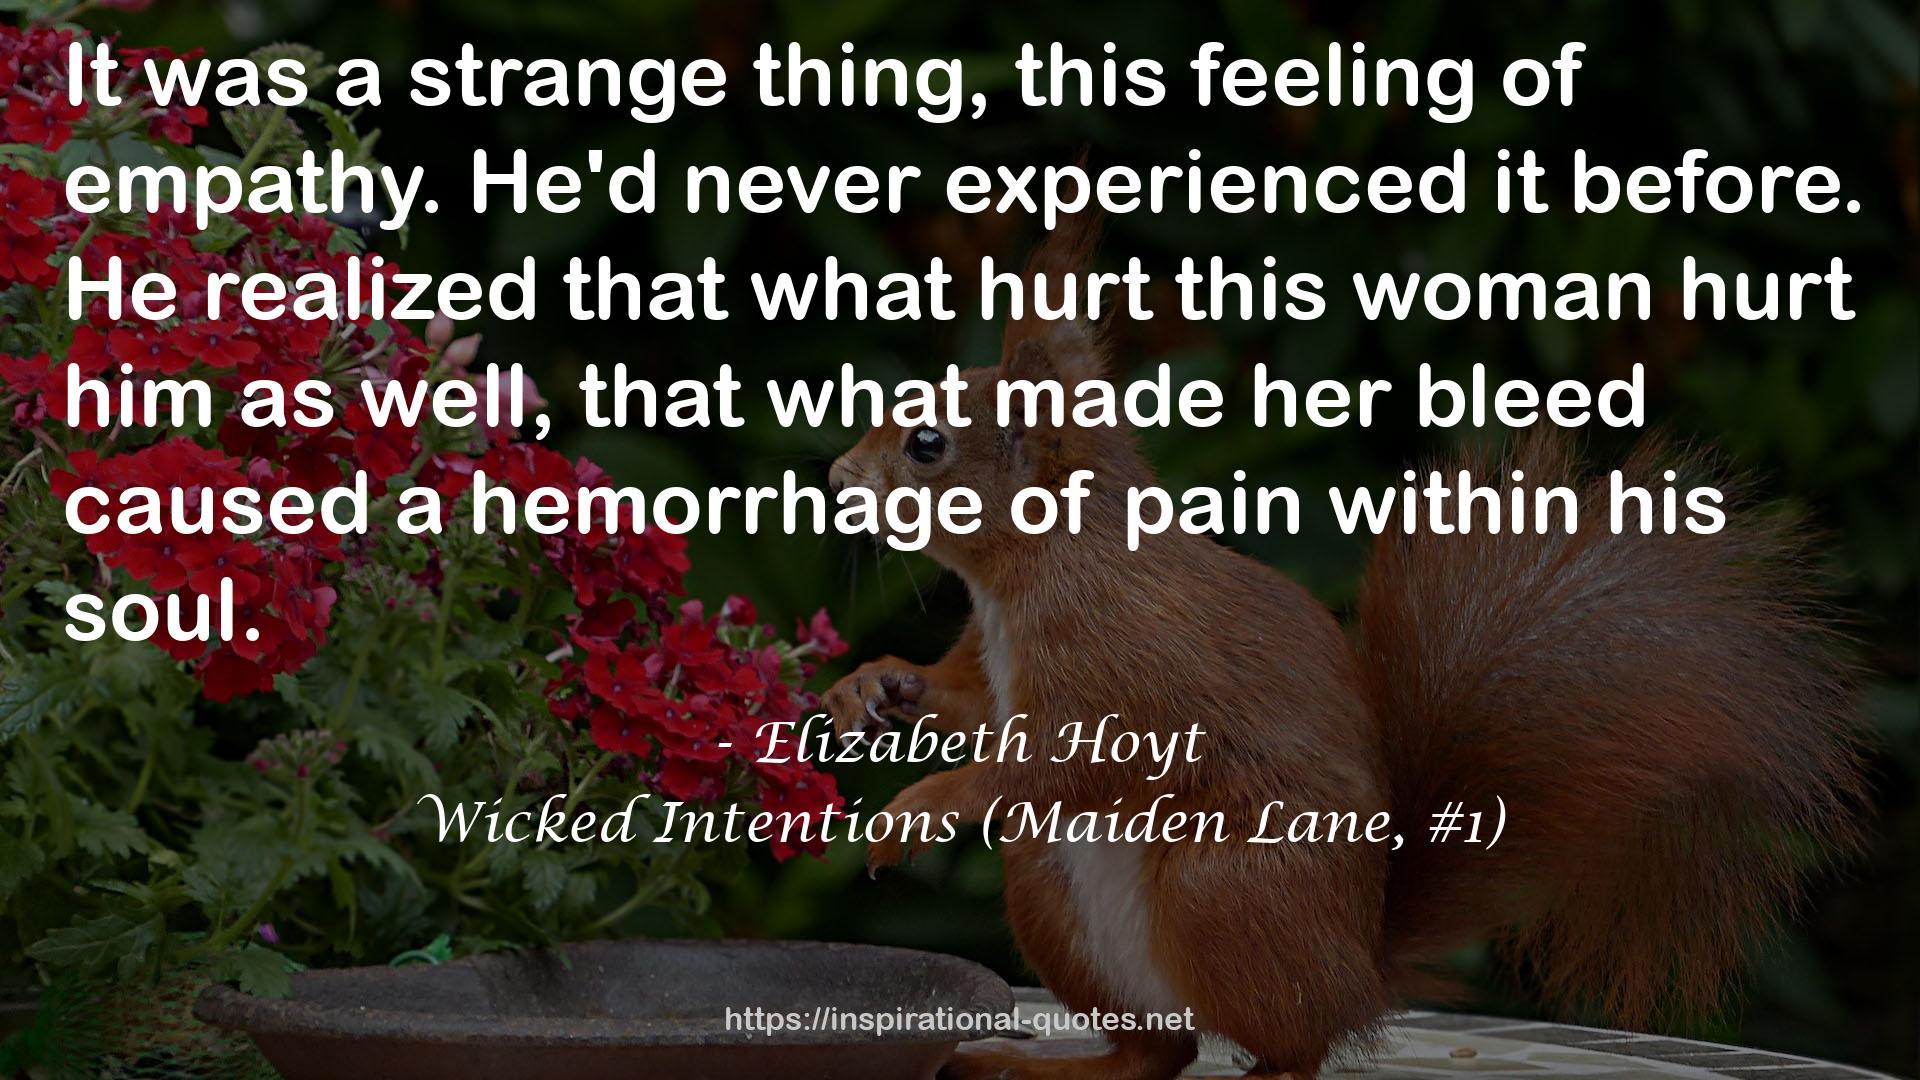 Wicked Intentions (Maiden Lane, #1) QUOTES